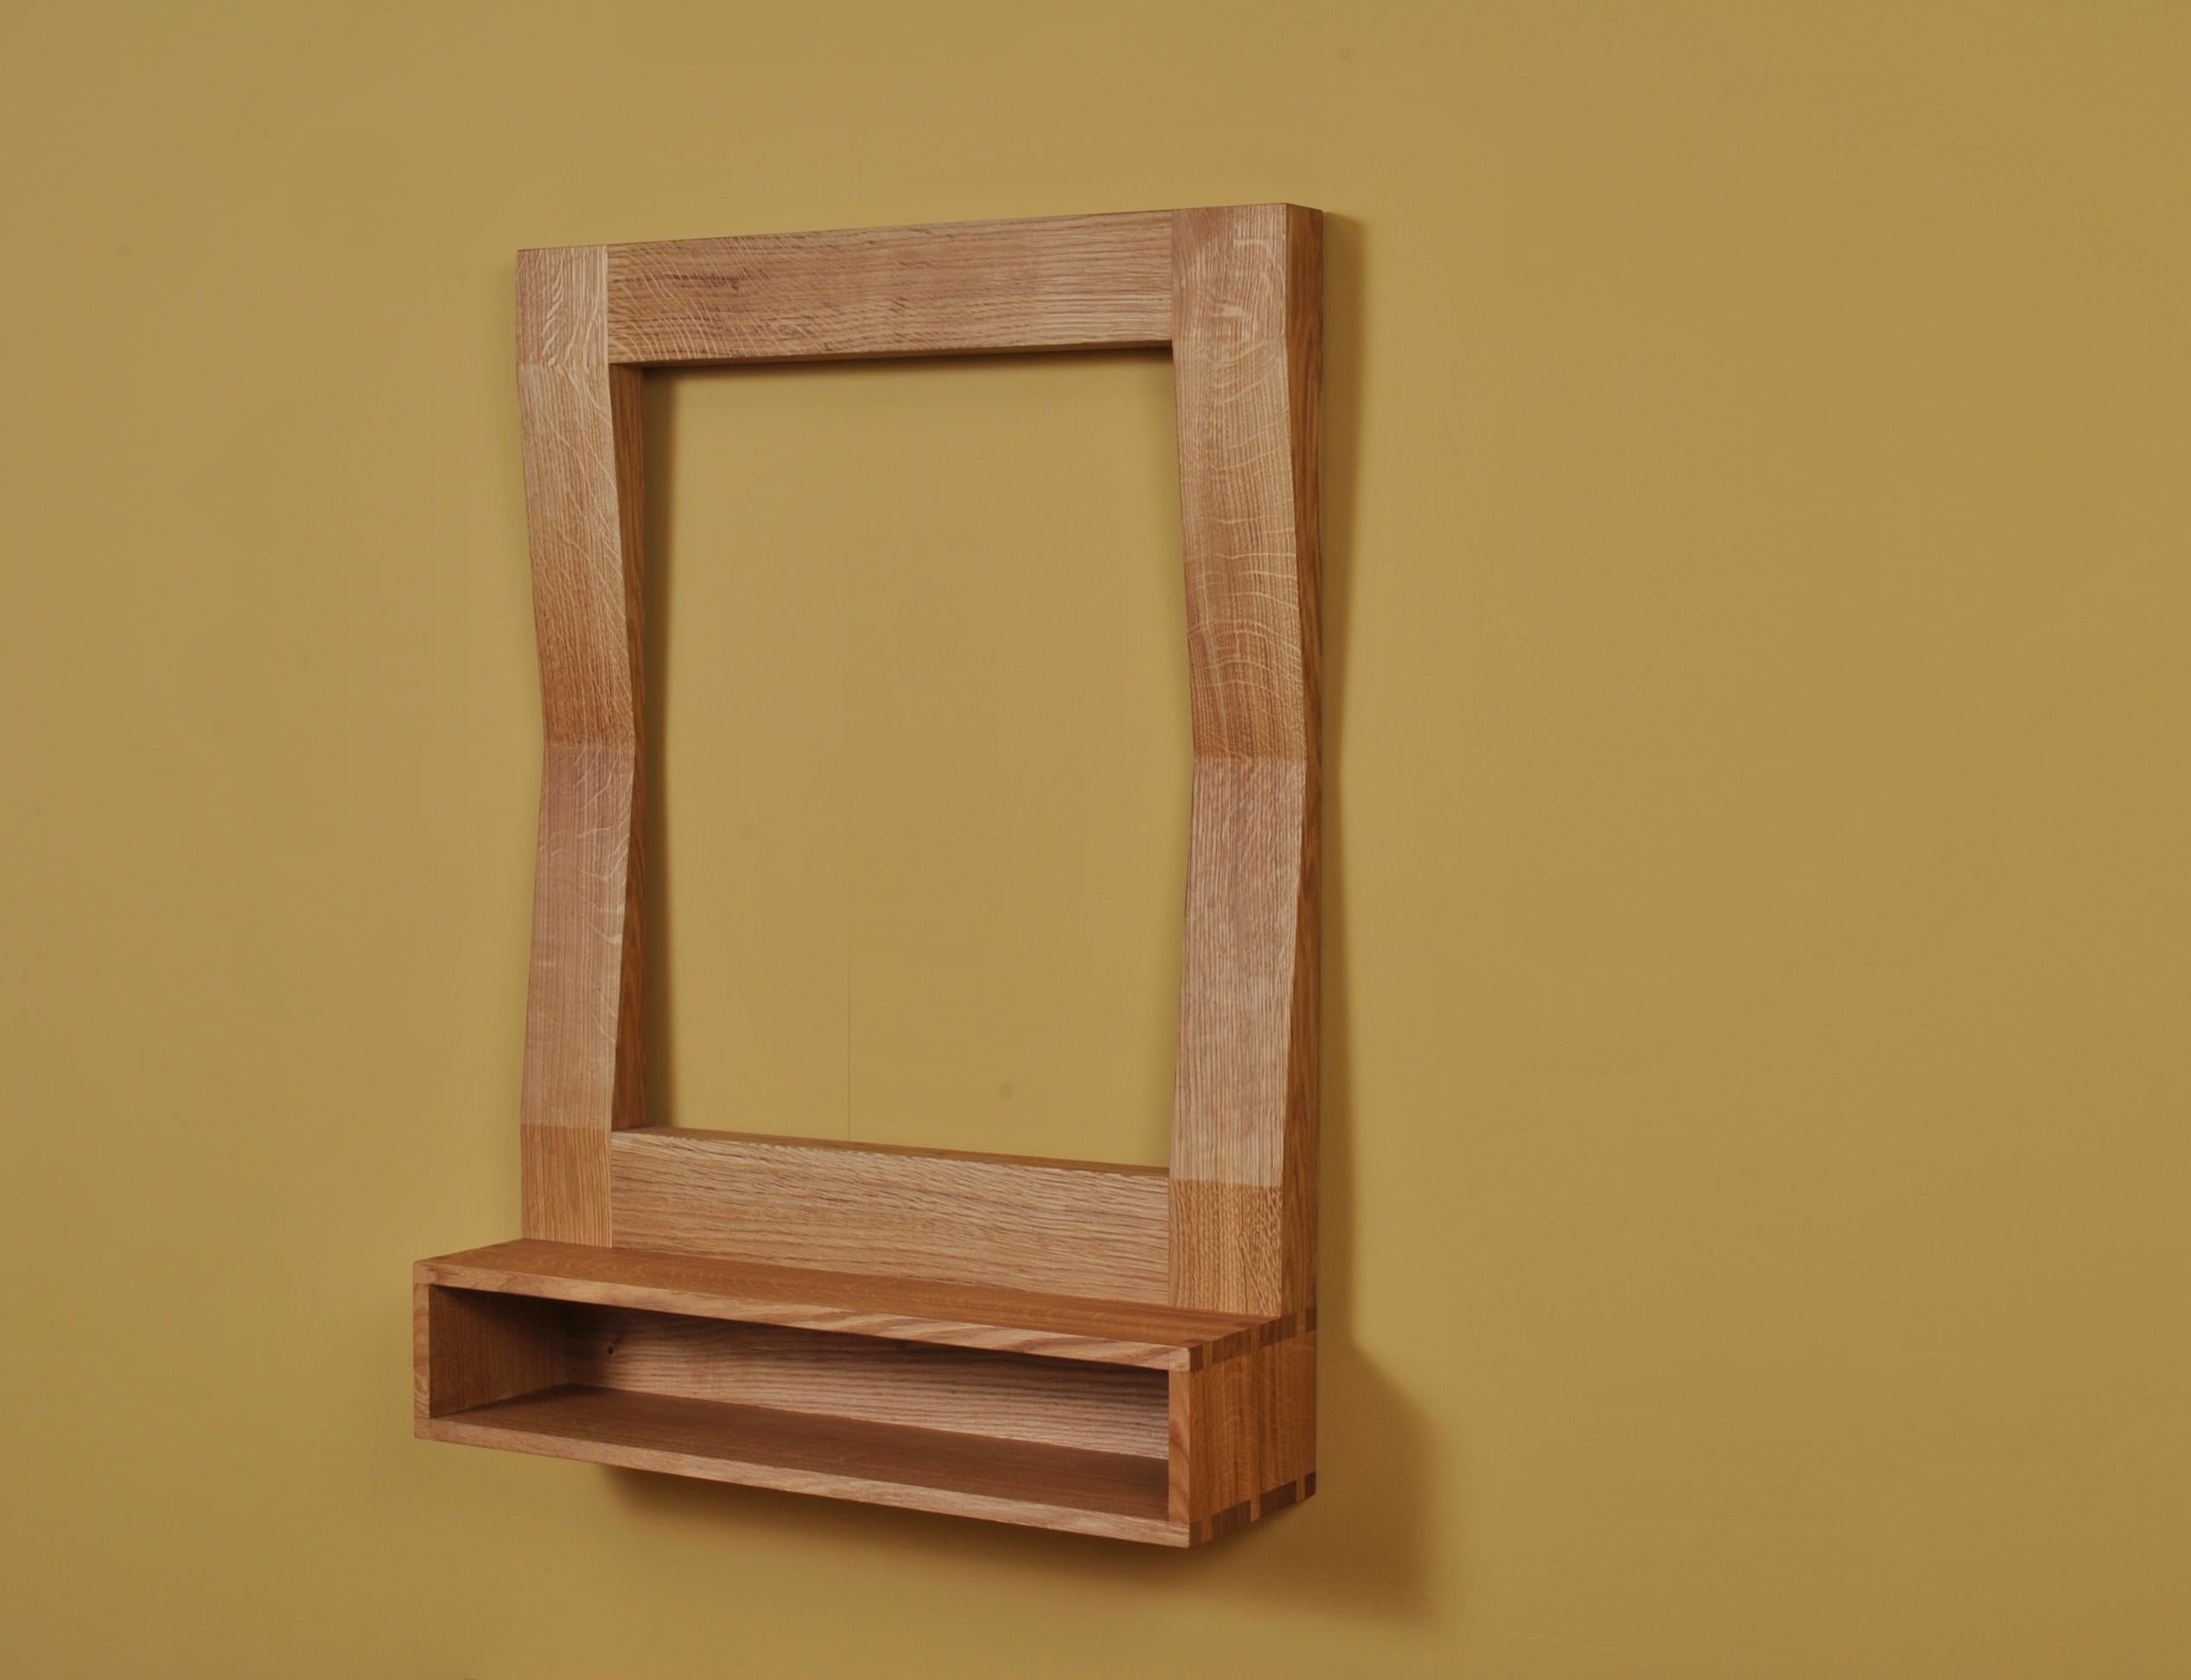 Large handcrafted ‘furrow’ oak framed mirror with shelf. The mirror glass is fitted by us in either standard silver or ‘bronzed’ (see image) mirror glass. Designed by SUM furniture and handcrafted in finest fully quartersawn English oak. Hand